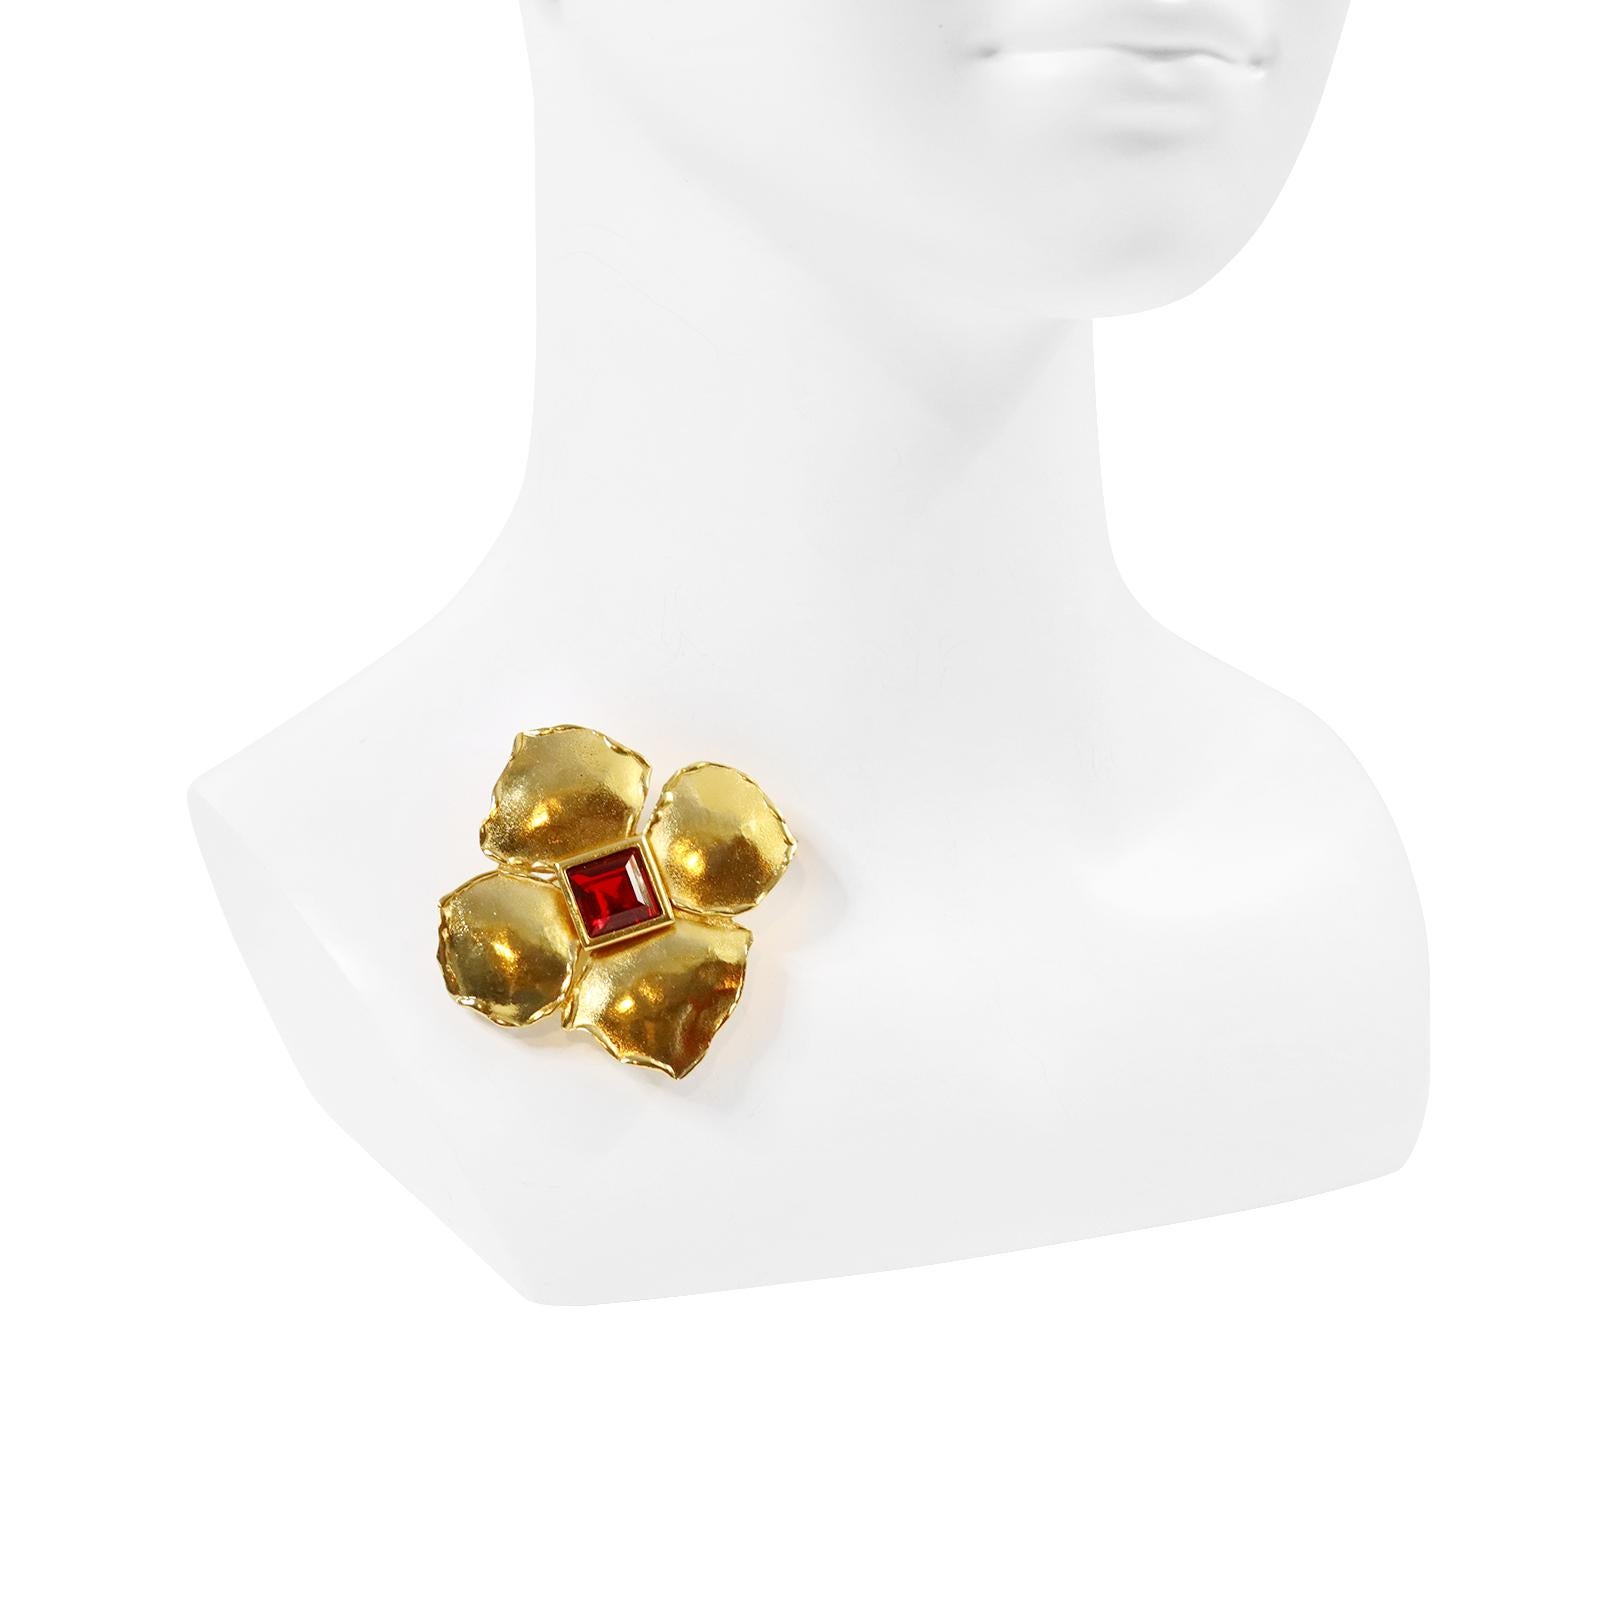 Vintage Maison Goossens Yves Saint Laurent YSL Gold Tone Flower Brooch.  Red Crystal in the Middle.  Has a Pendant as well. Would be beautiful on Pearls or Gold necklace of any kind. 2.5